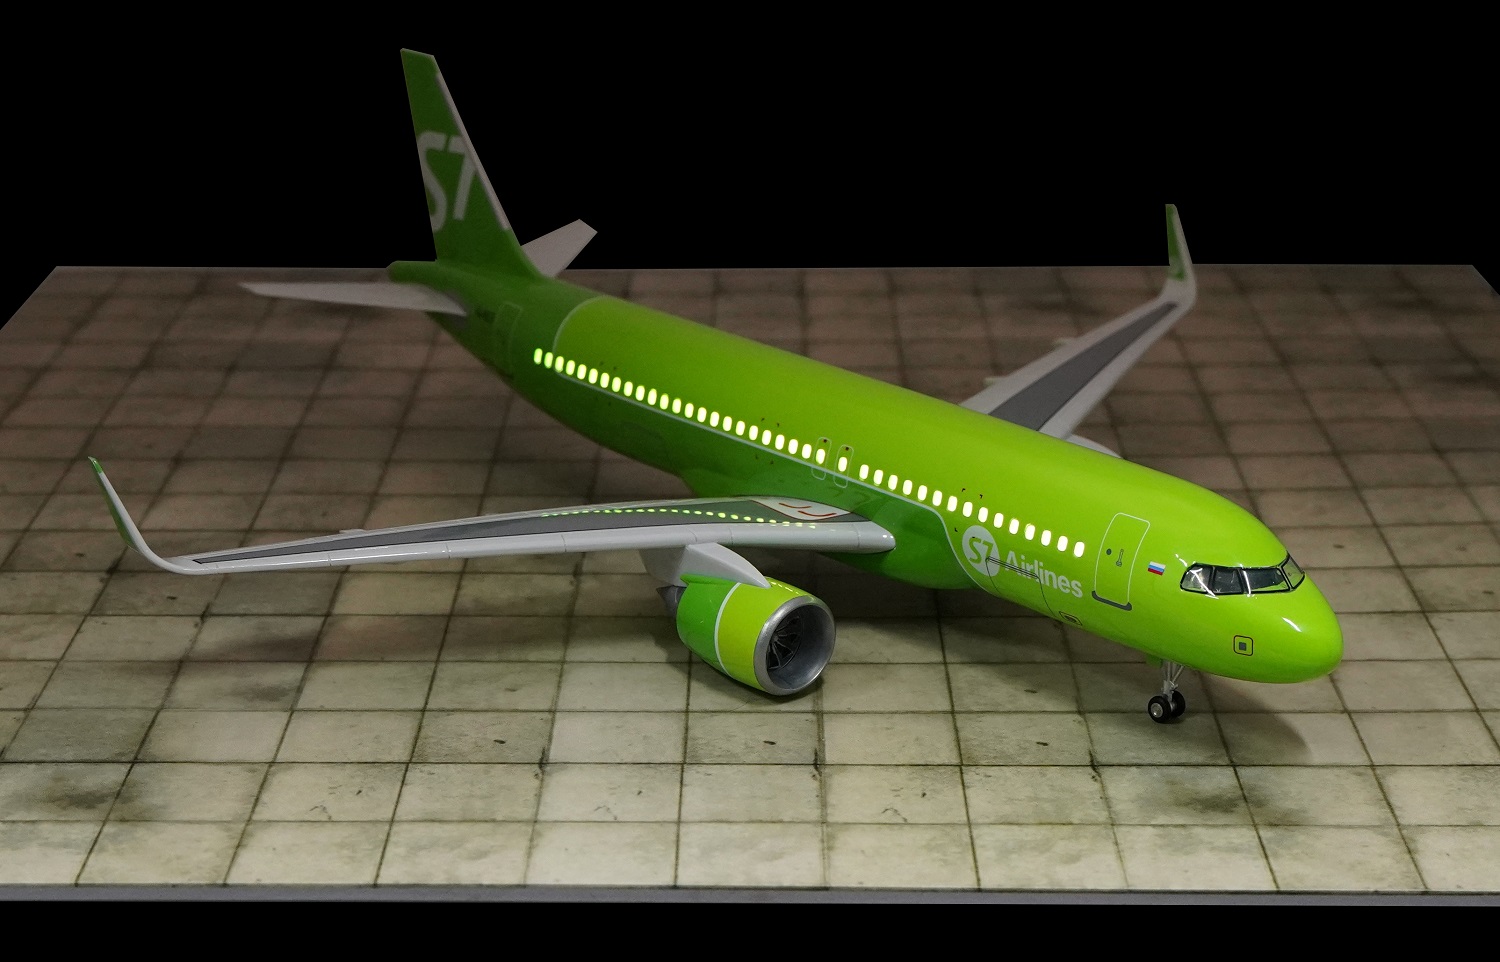   Airbus A320 Neo,  S7 Airlines .    .  # 2 hobbyplus.ru